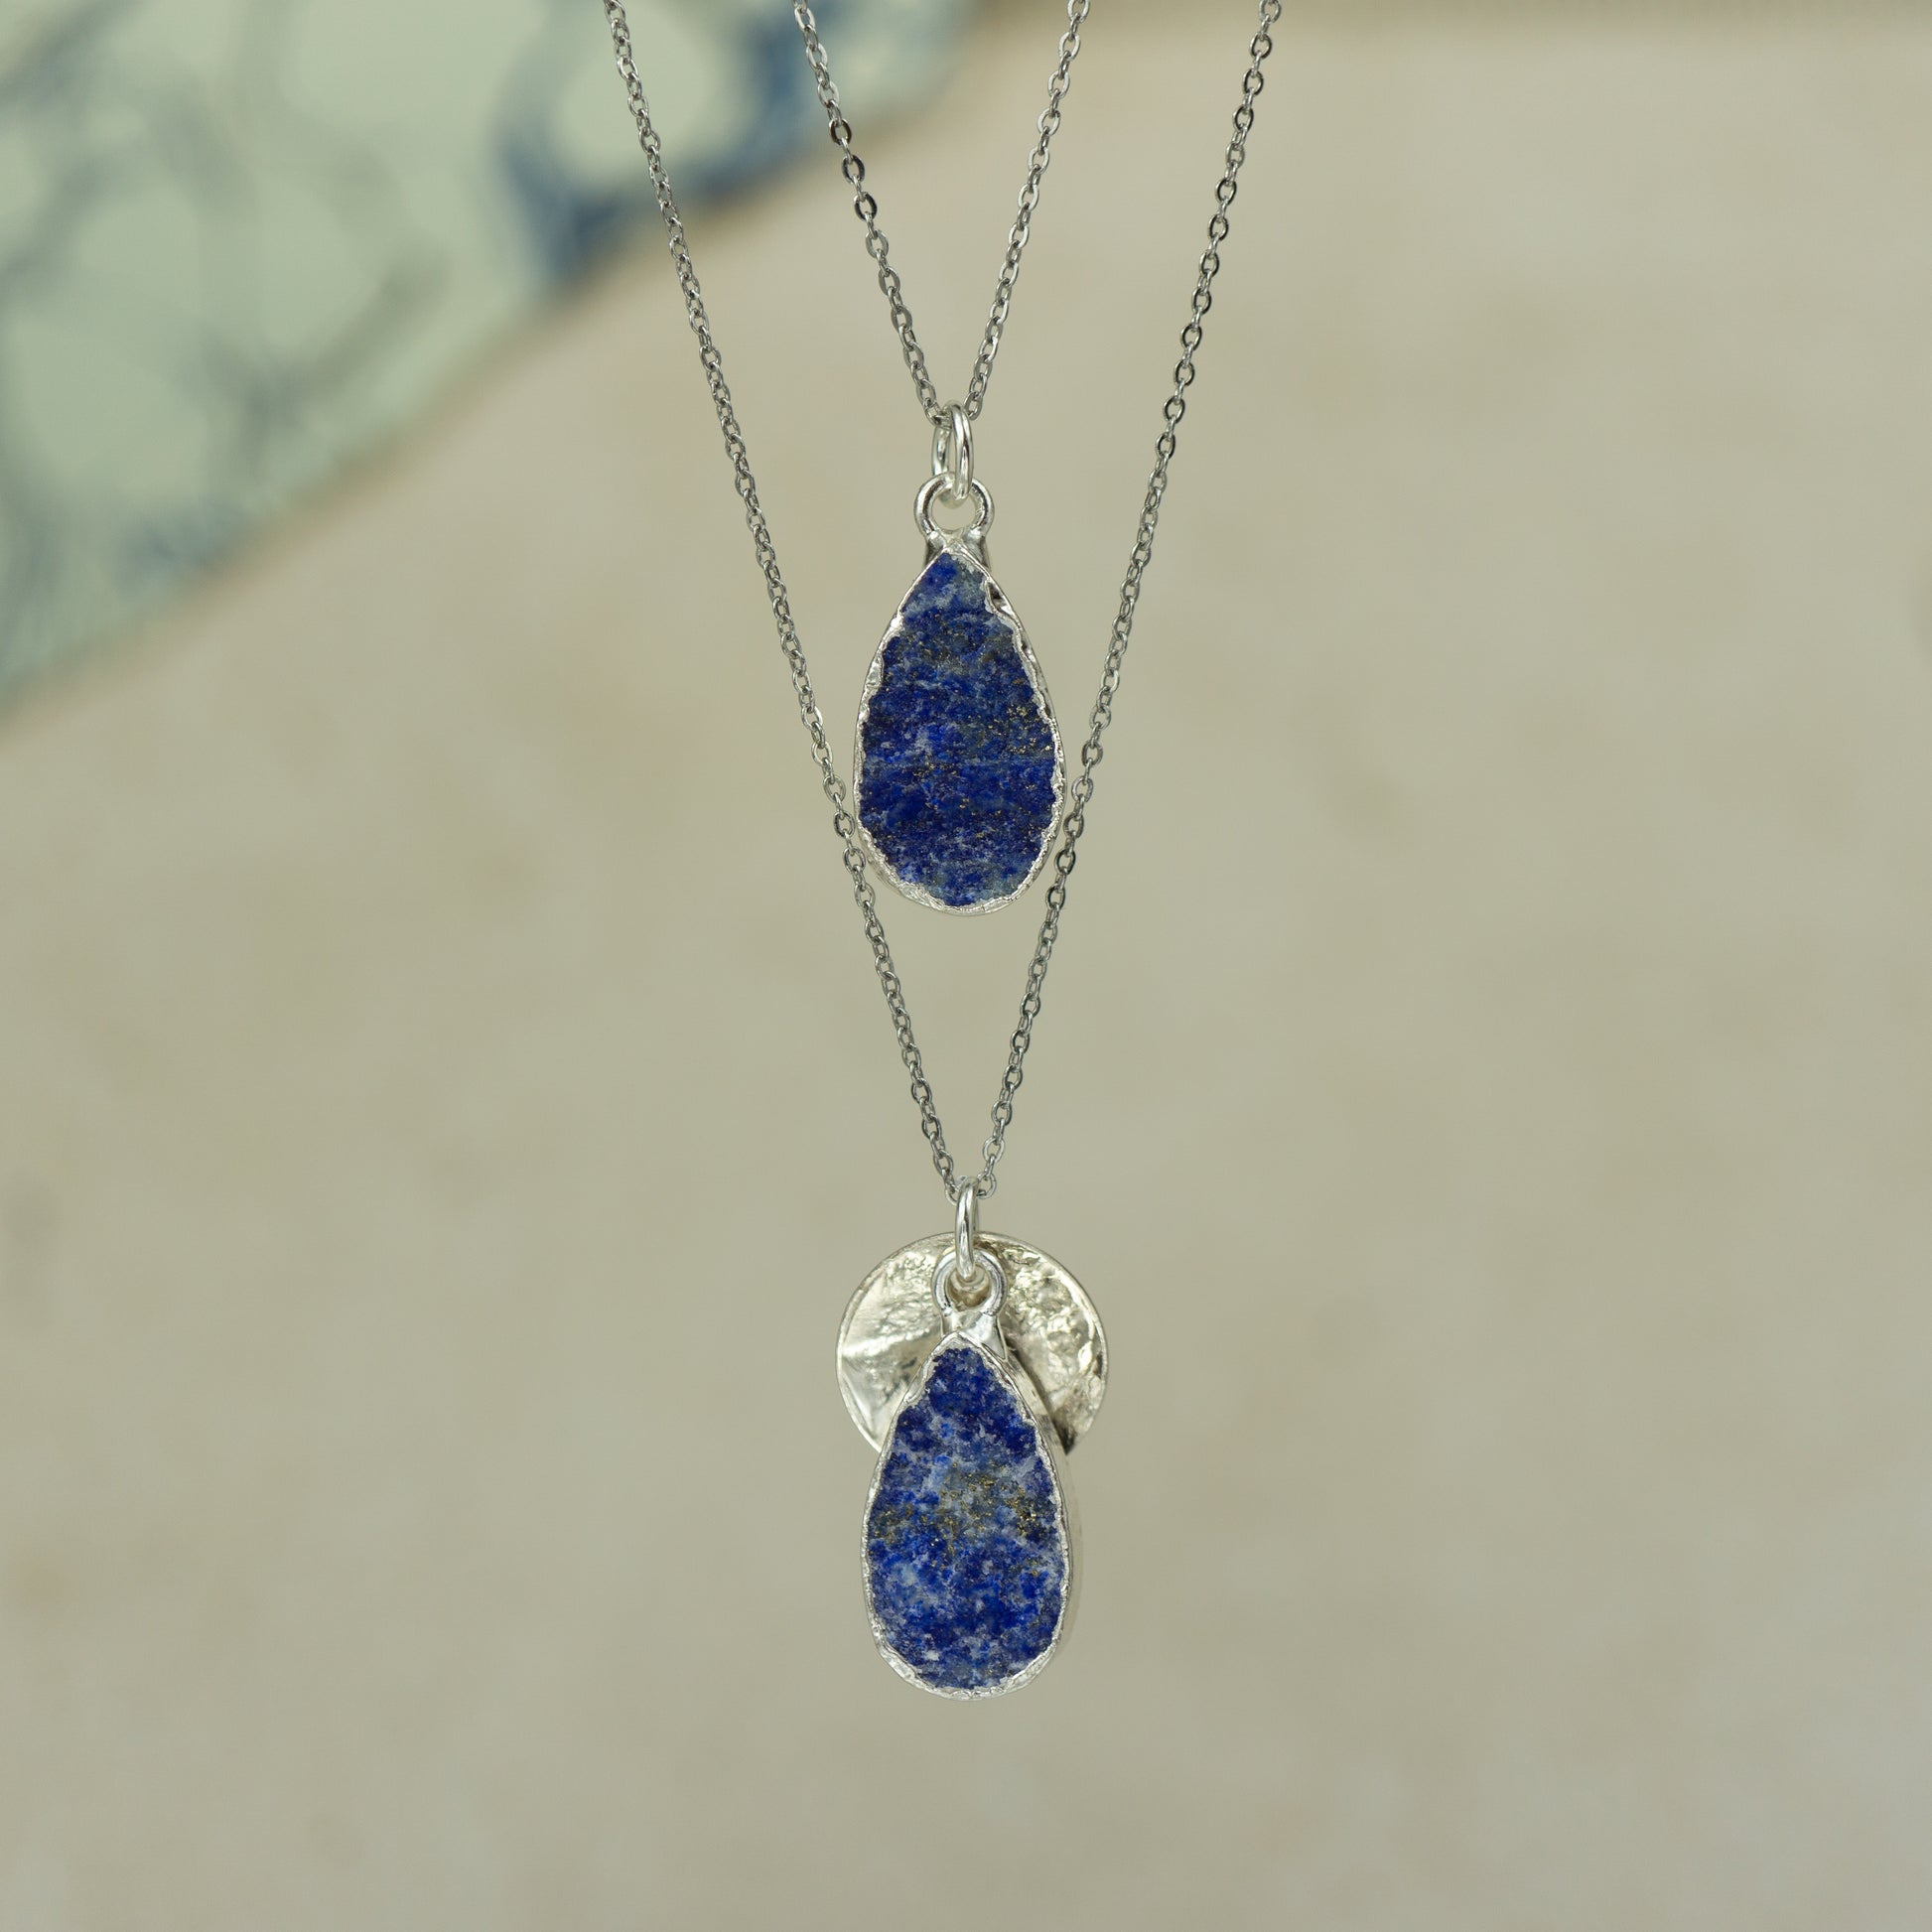 Raw blue Lapis Lazuli teardrop pear shaped pendants finished in silver on a chains.